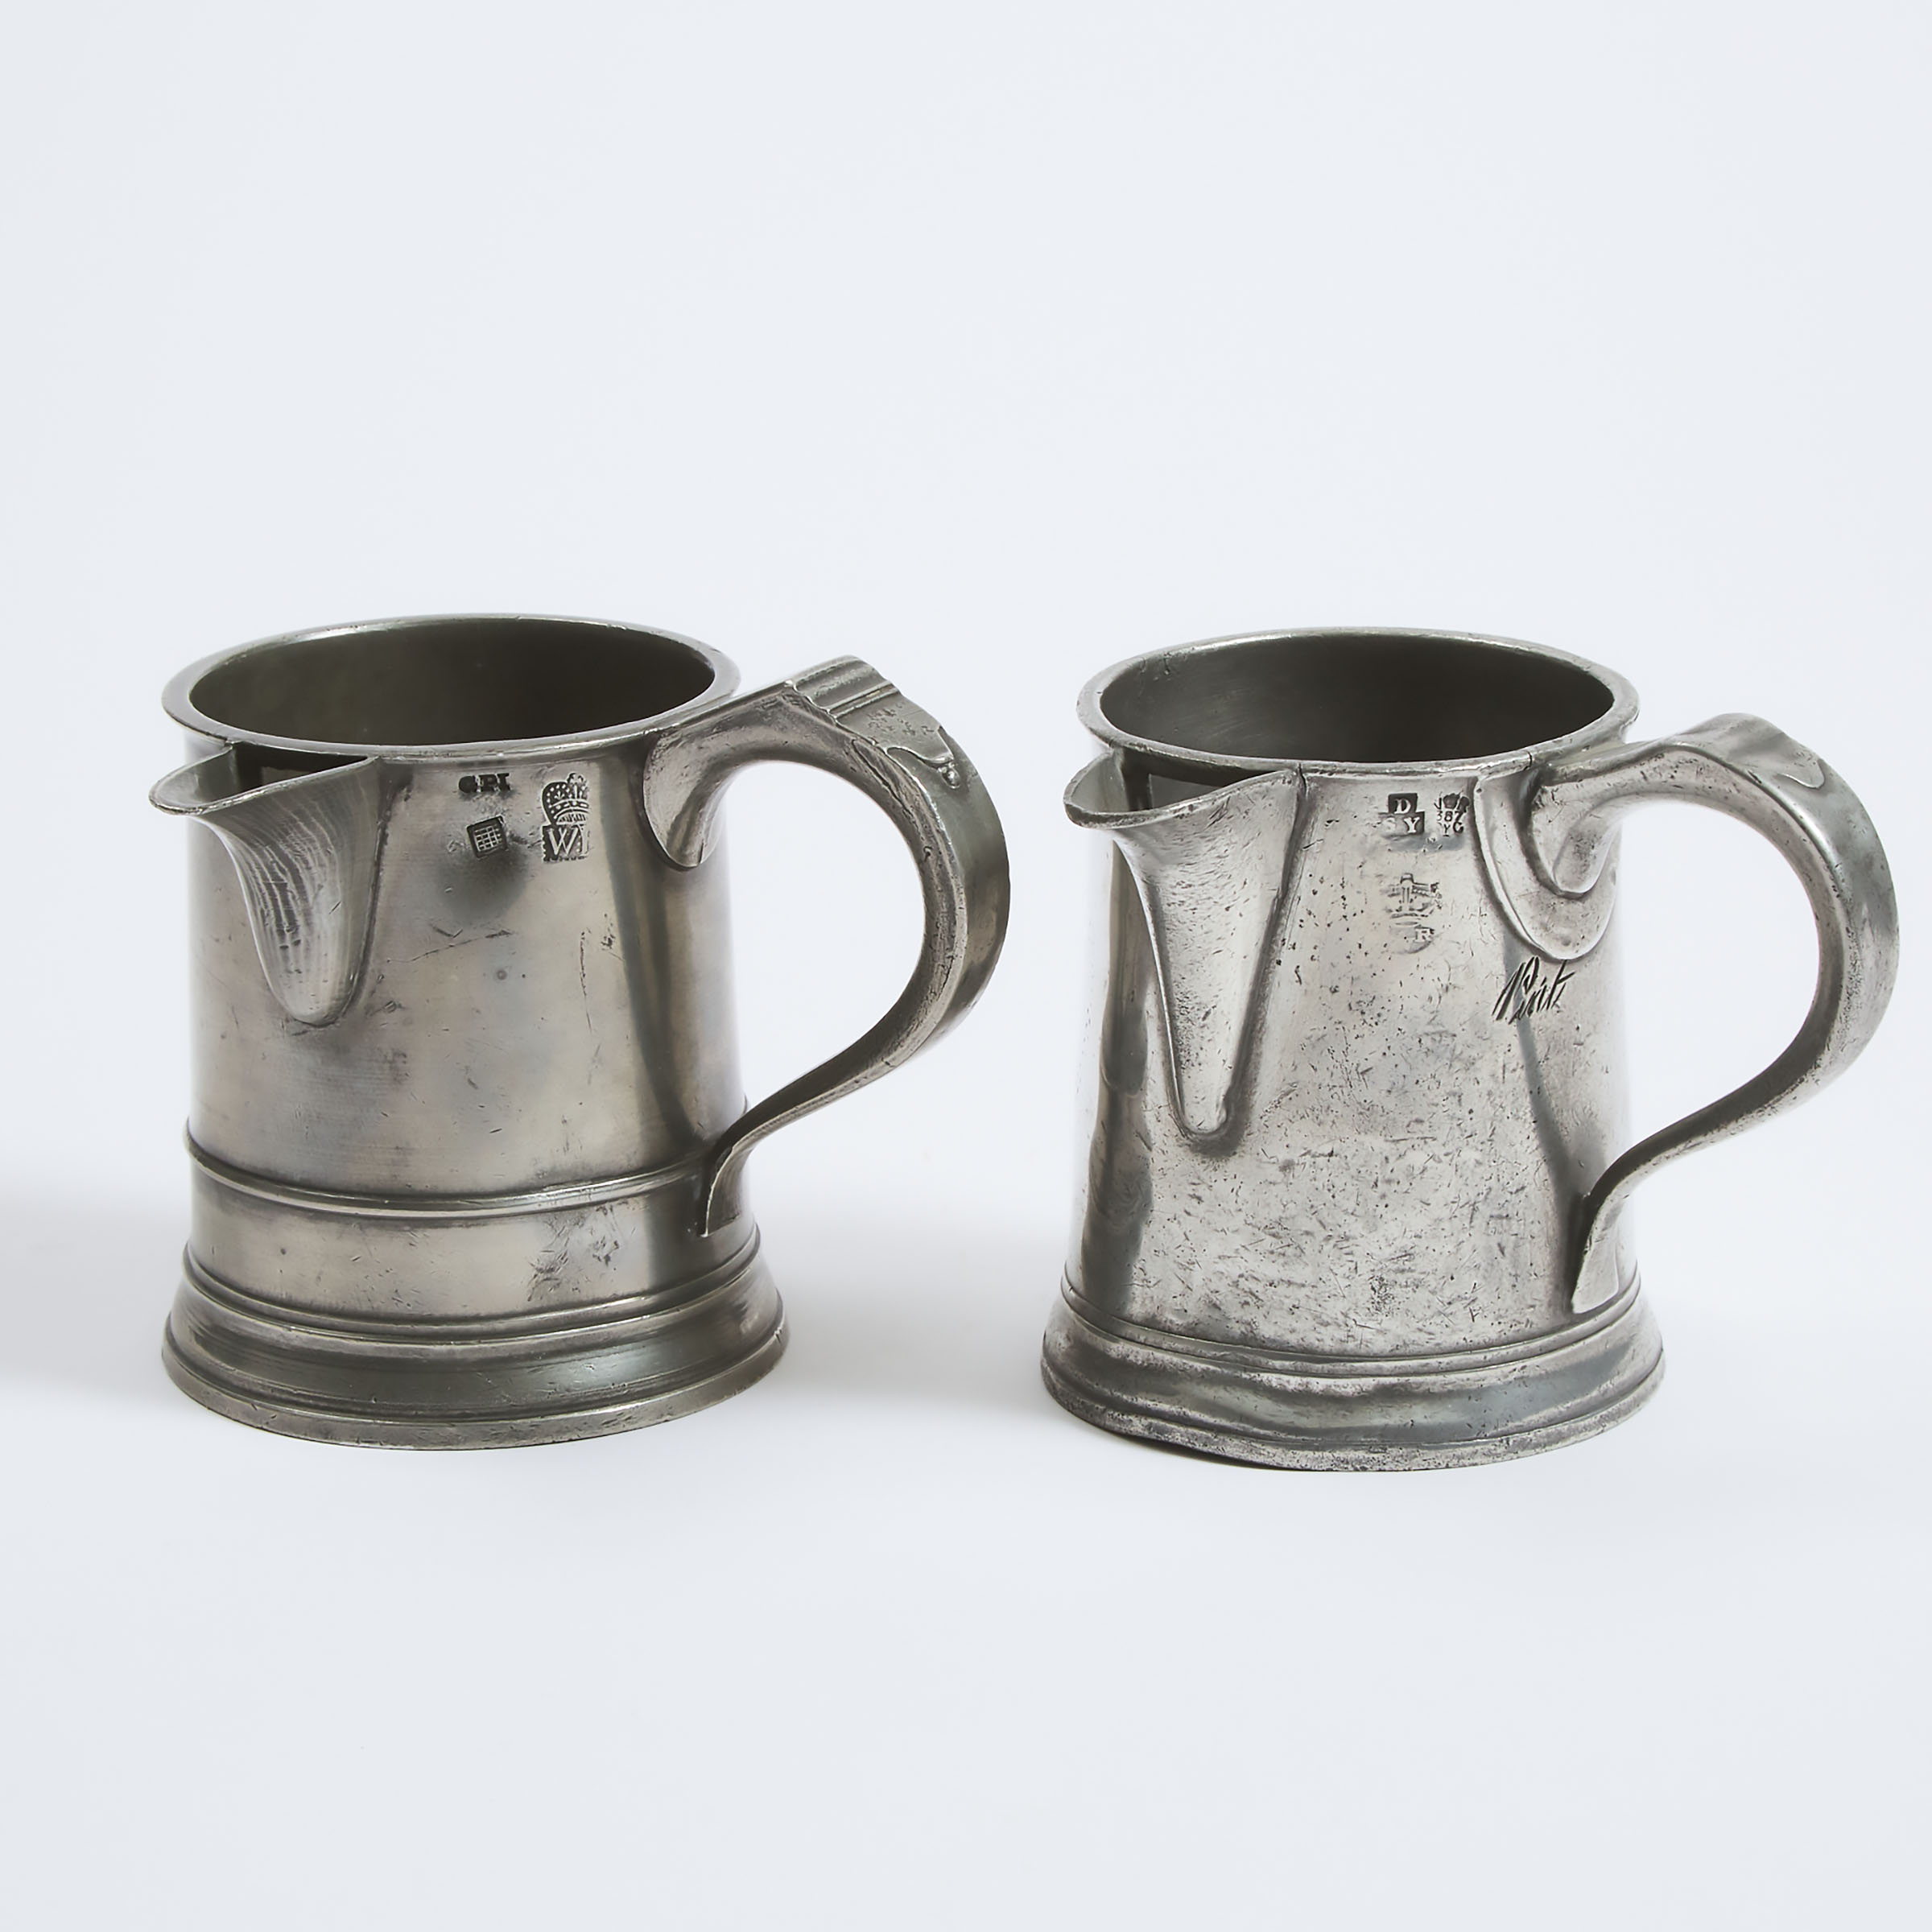 Two English Pewter Straight Sided Spouted Imperial Pint Measures, early 19th century